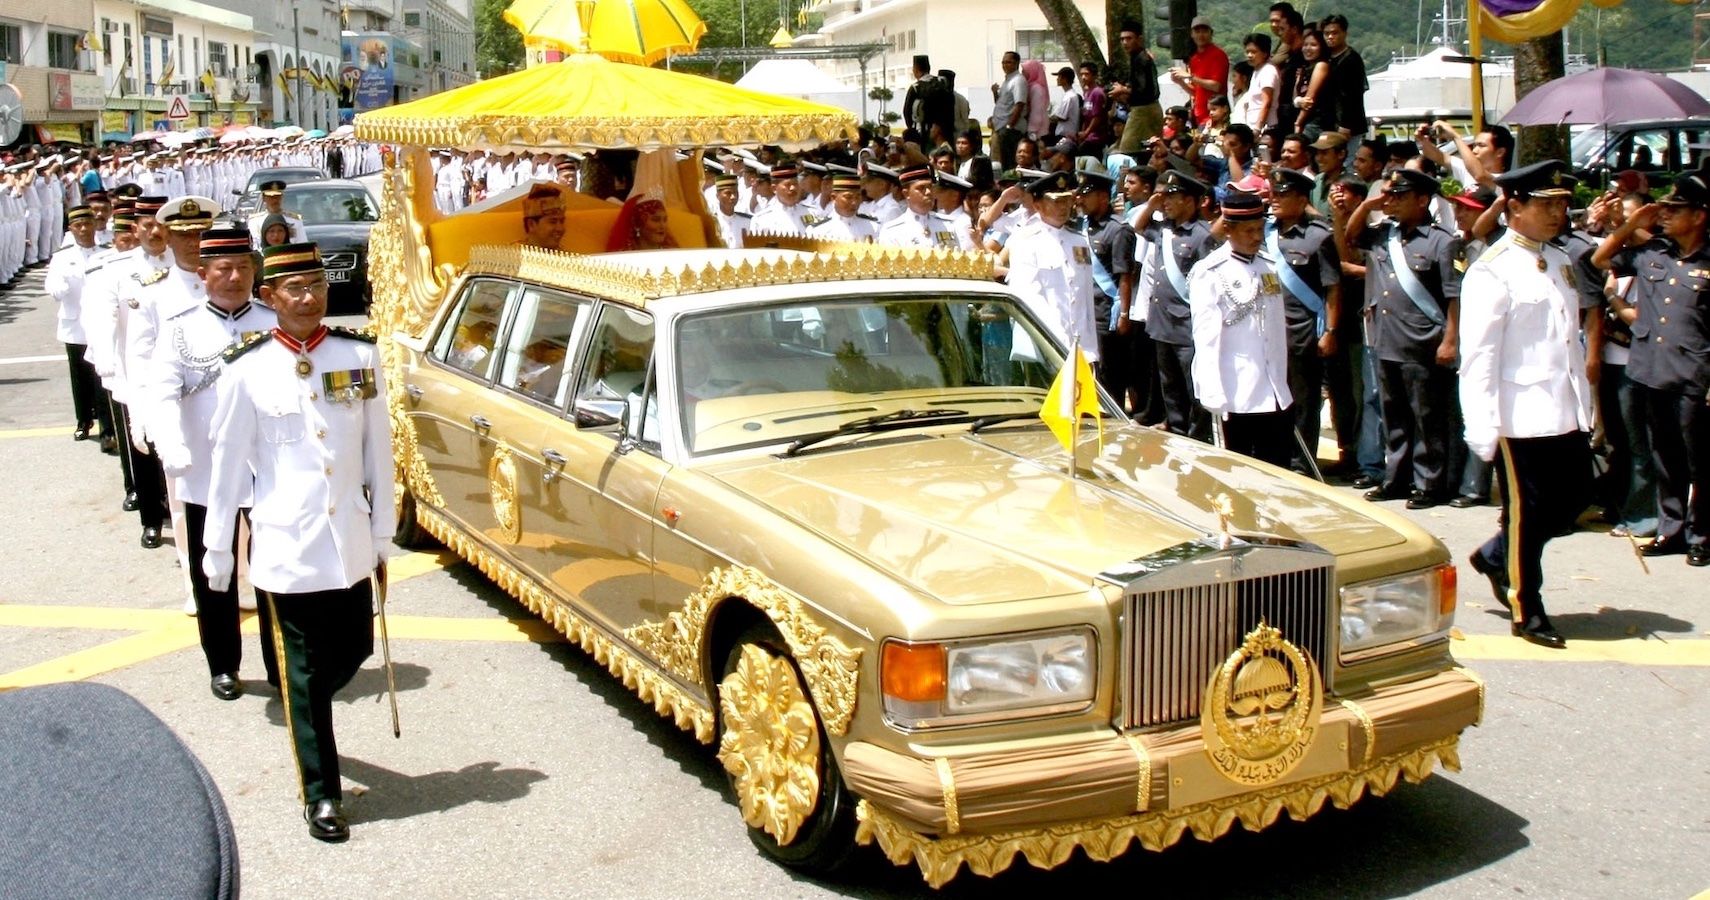 This gold Rolls-Royce was made for the wedding of the Sultan's daughter